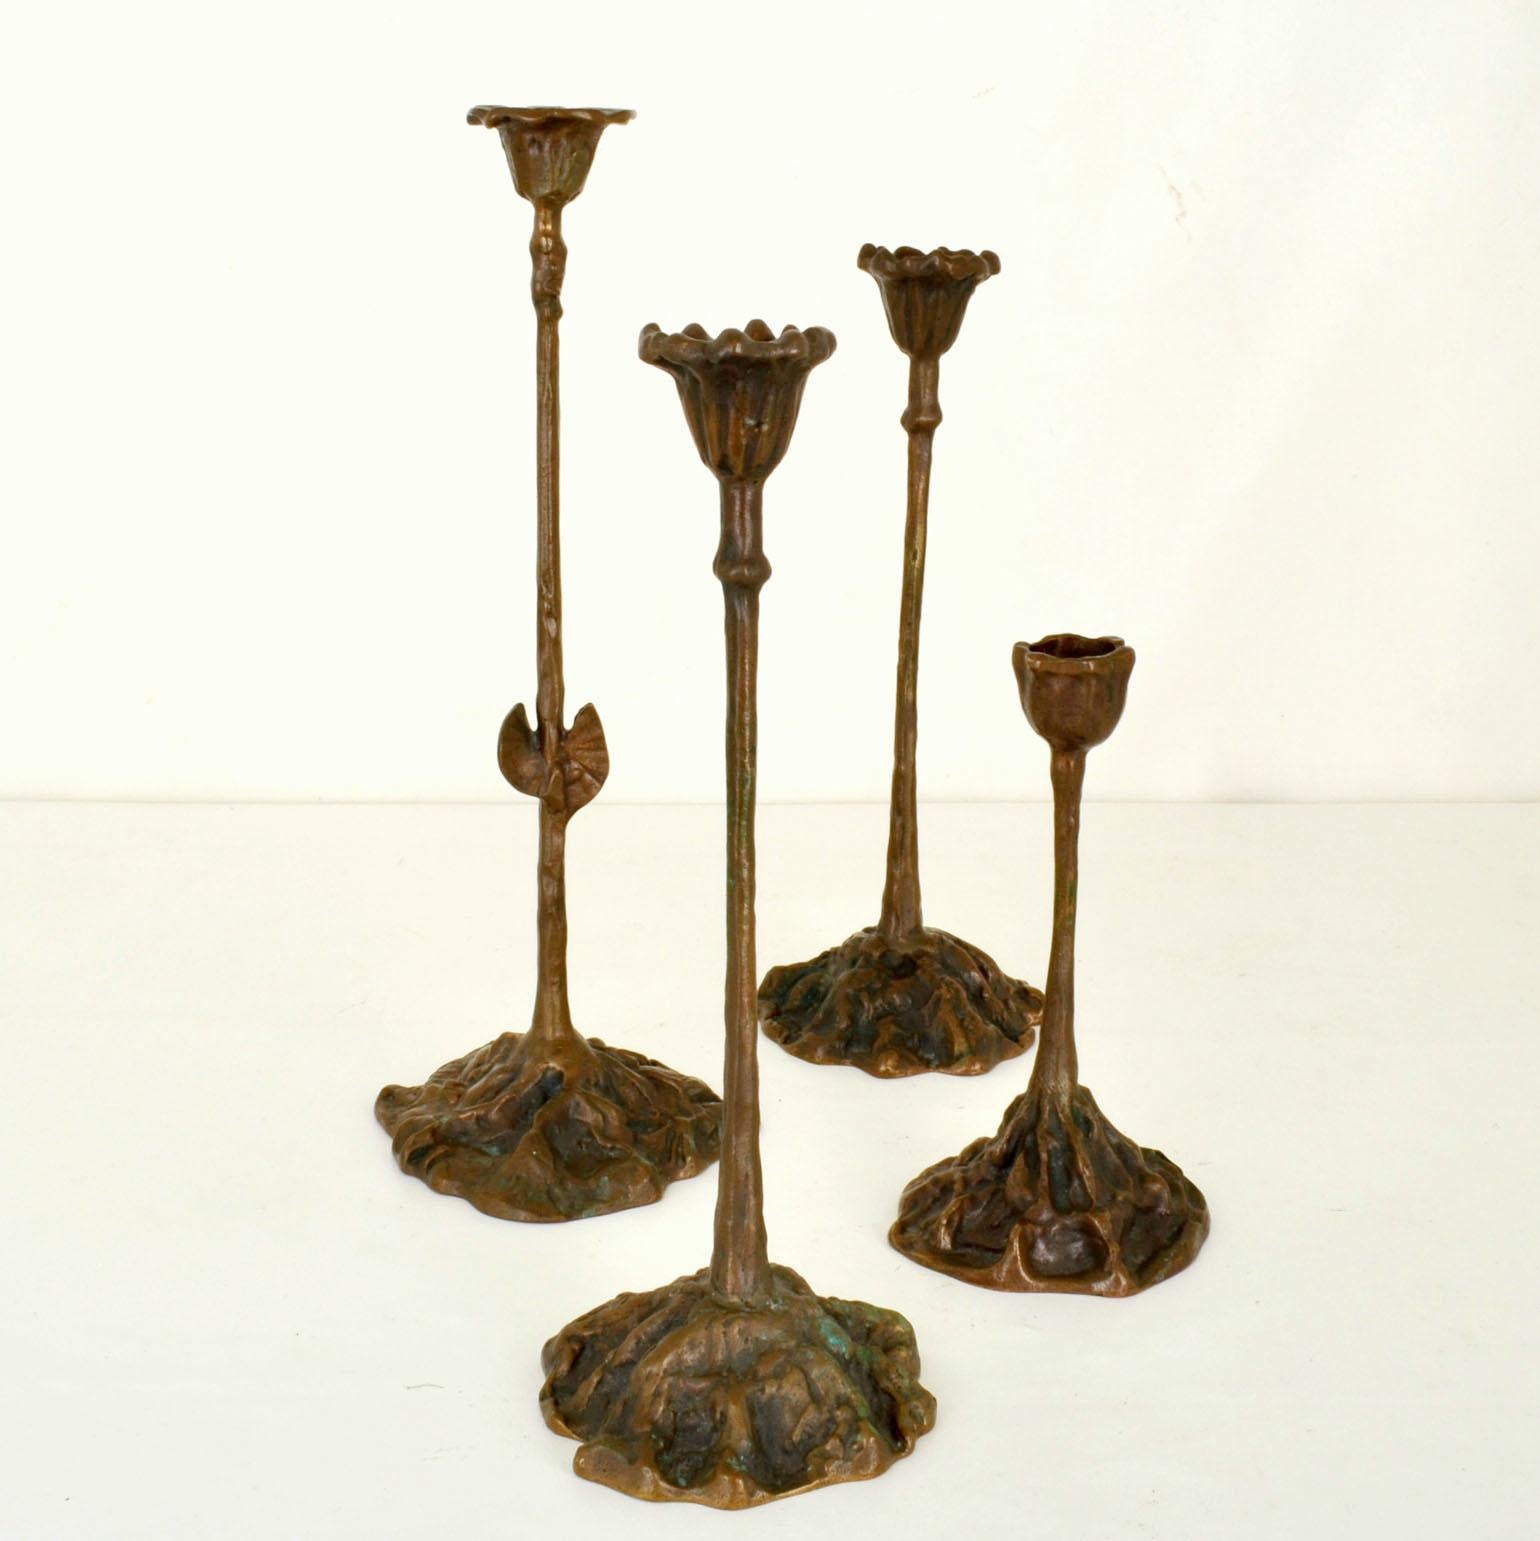 Group of four candle holders on different heights cast bronze in organic design expressing growth of plants from rooted bases. They are designed for regular candles. The bronze finish has its original patina that is close to nature with fragments of